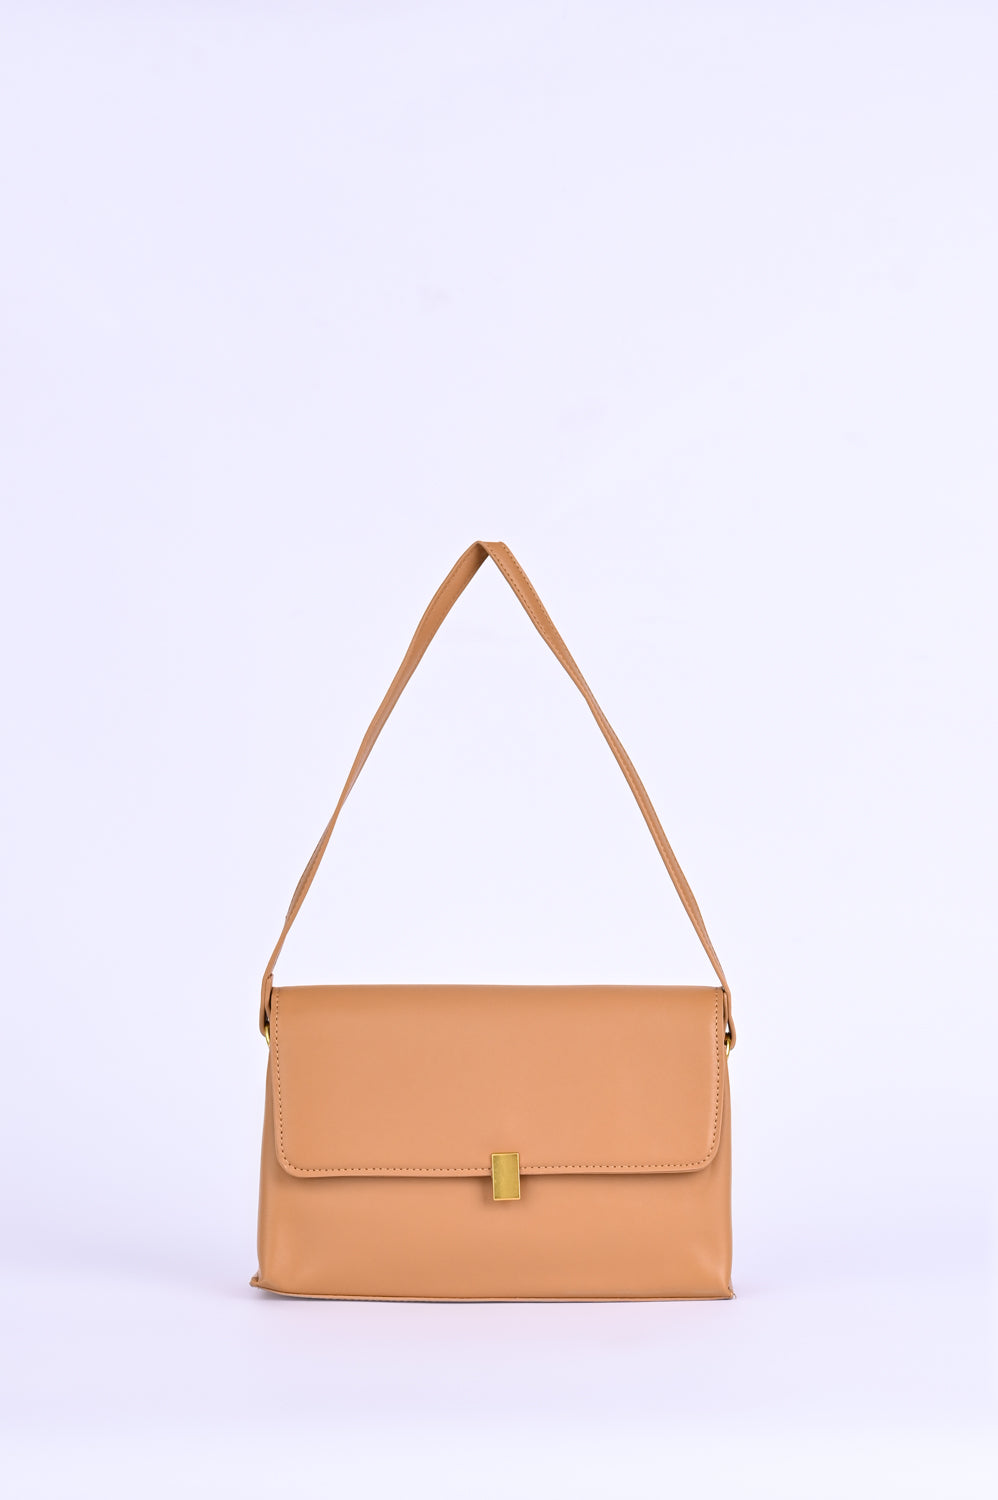 SATCHEL BAG WITH DOUBLE STRAPS